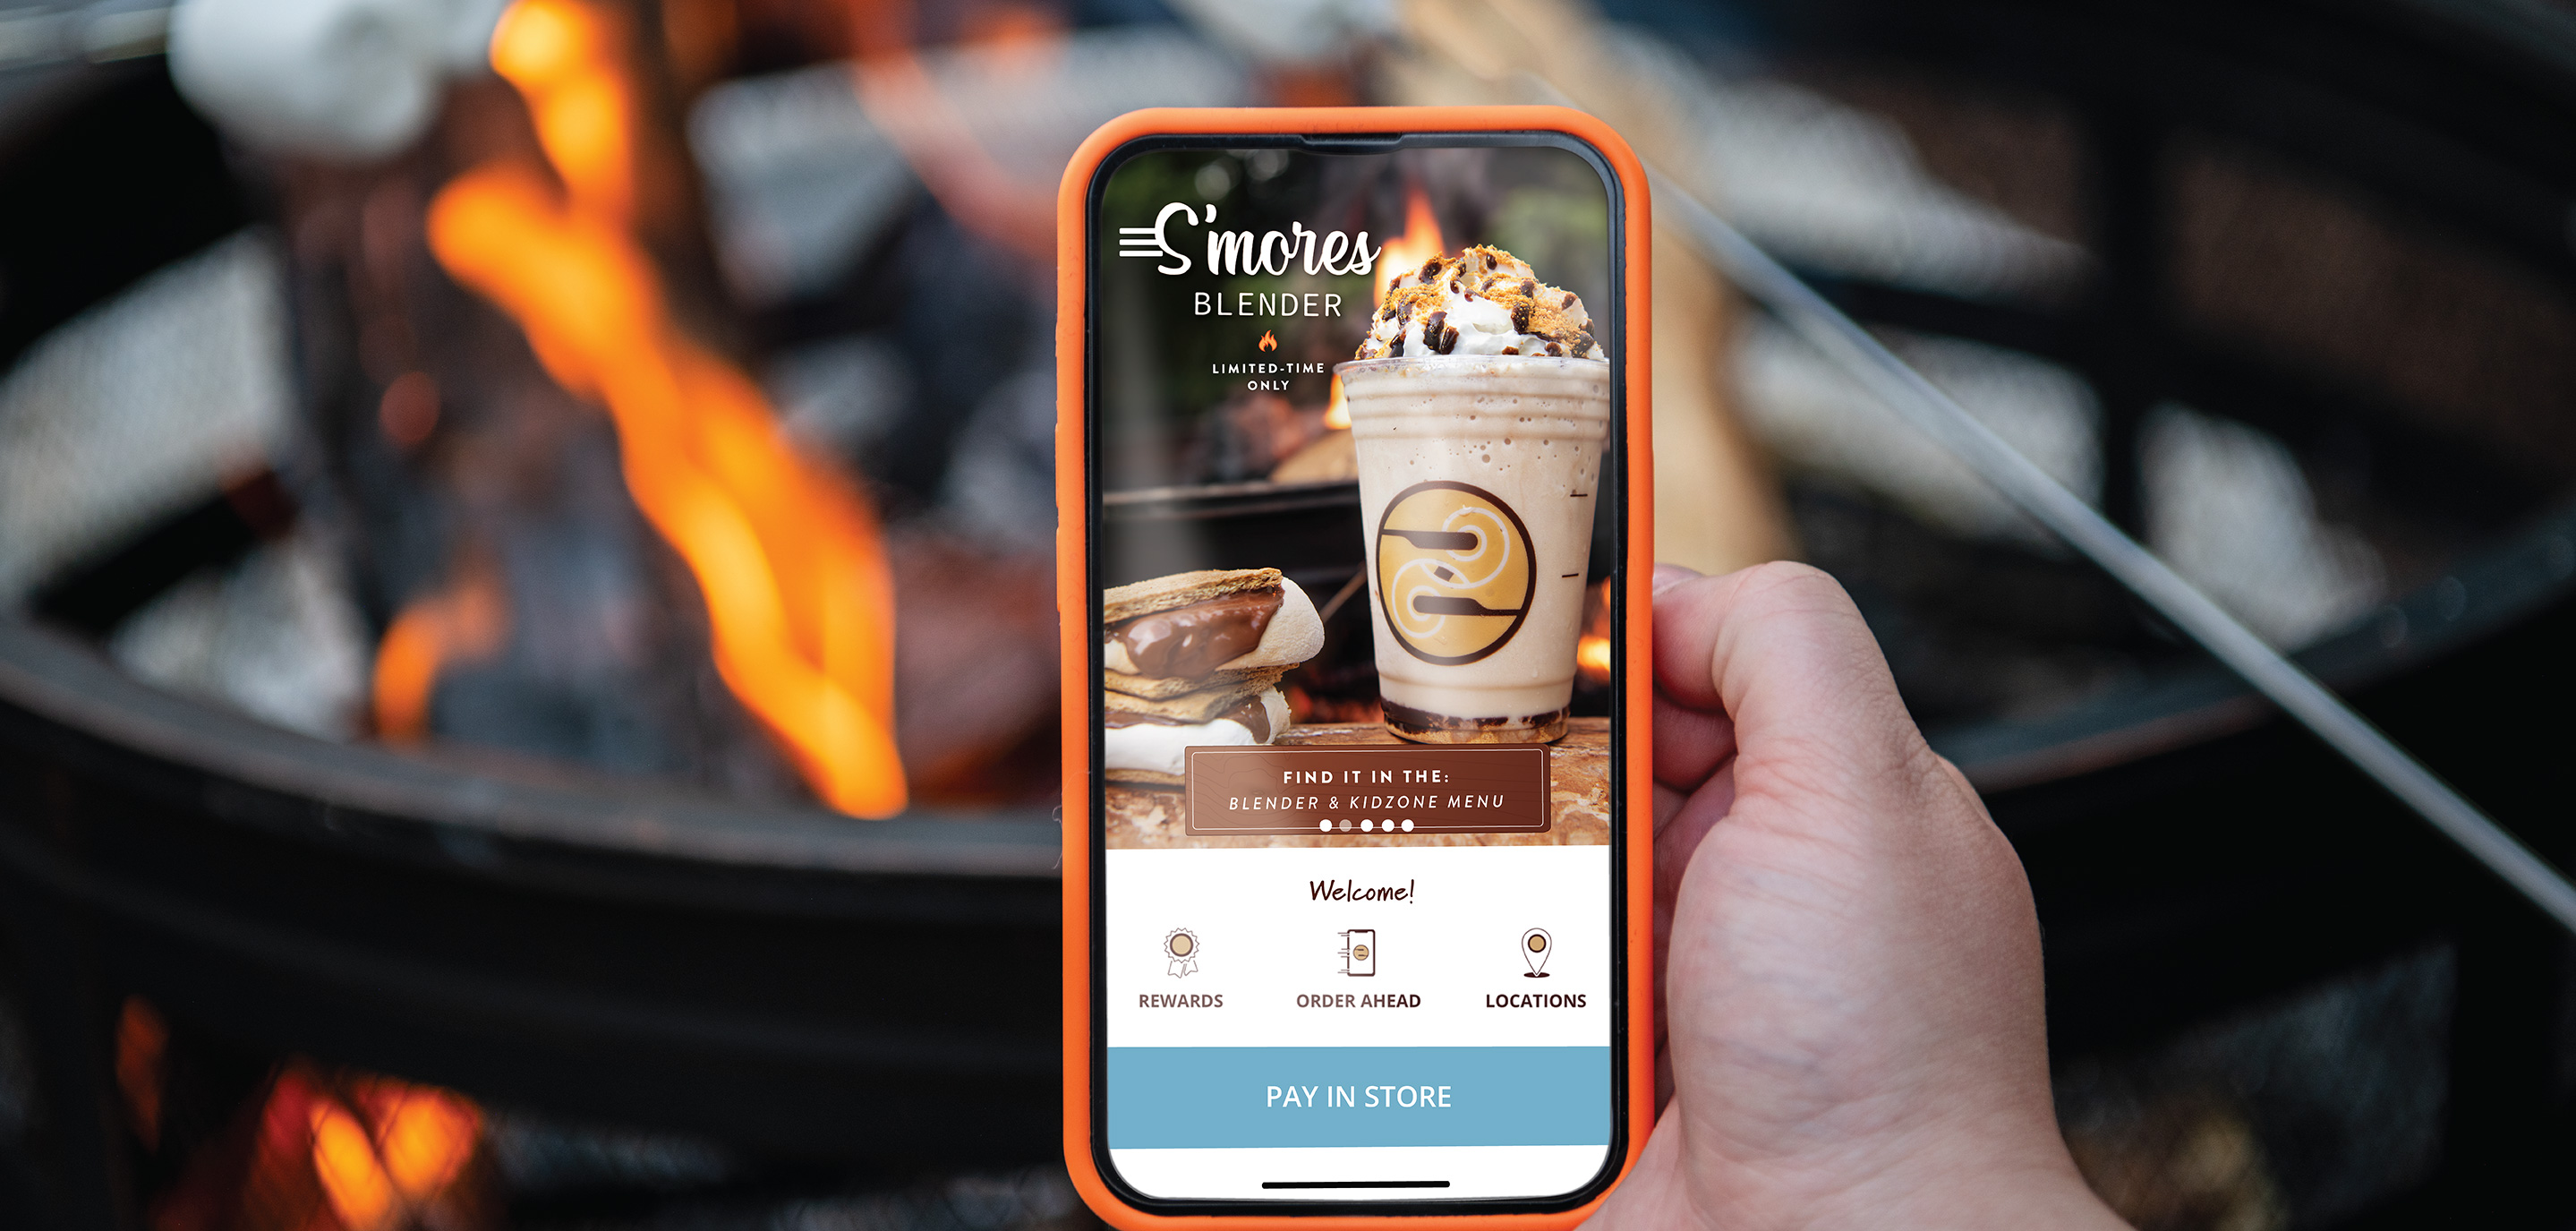 Zing's app shown on mobile phone in front of a campfire